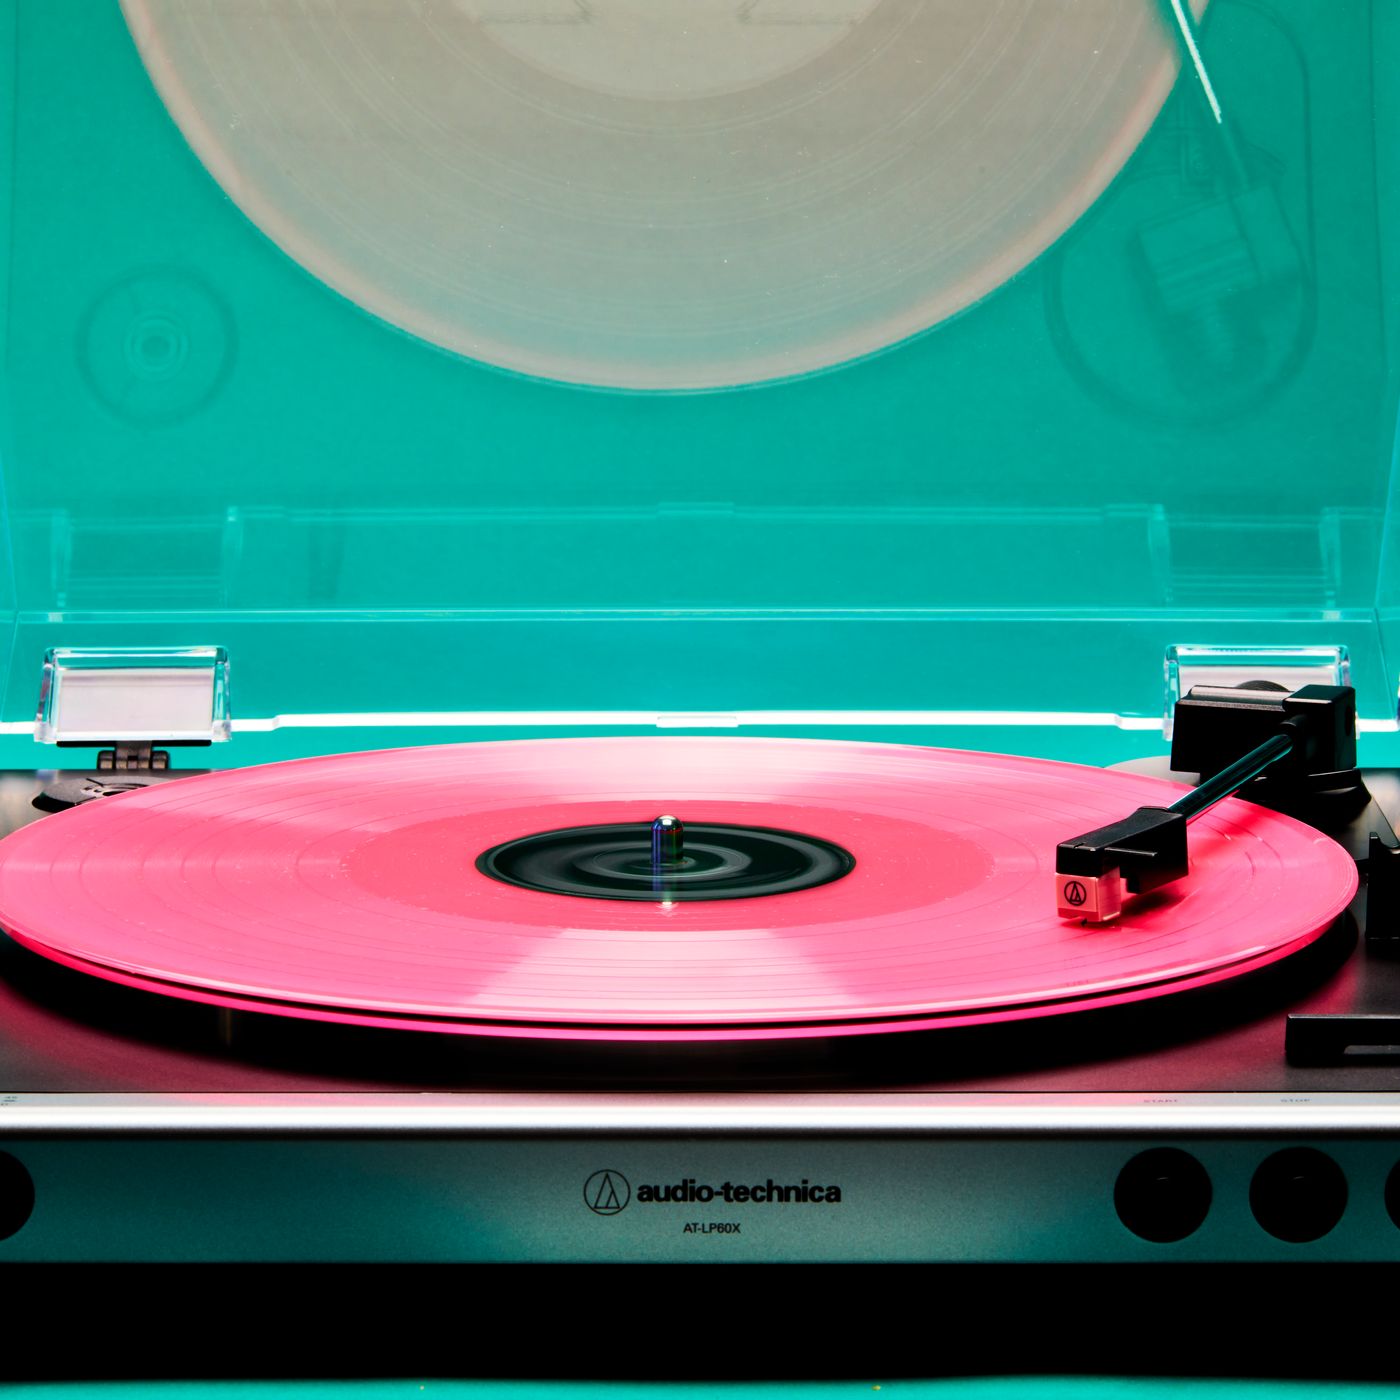 Vinyl Record Player Turntable with Built-in Speakers and USB Belt